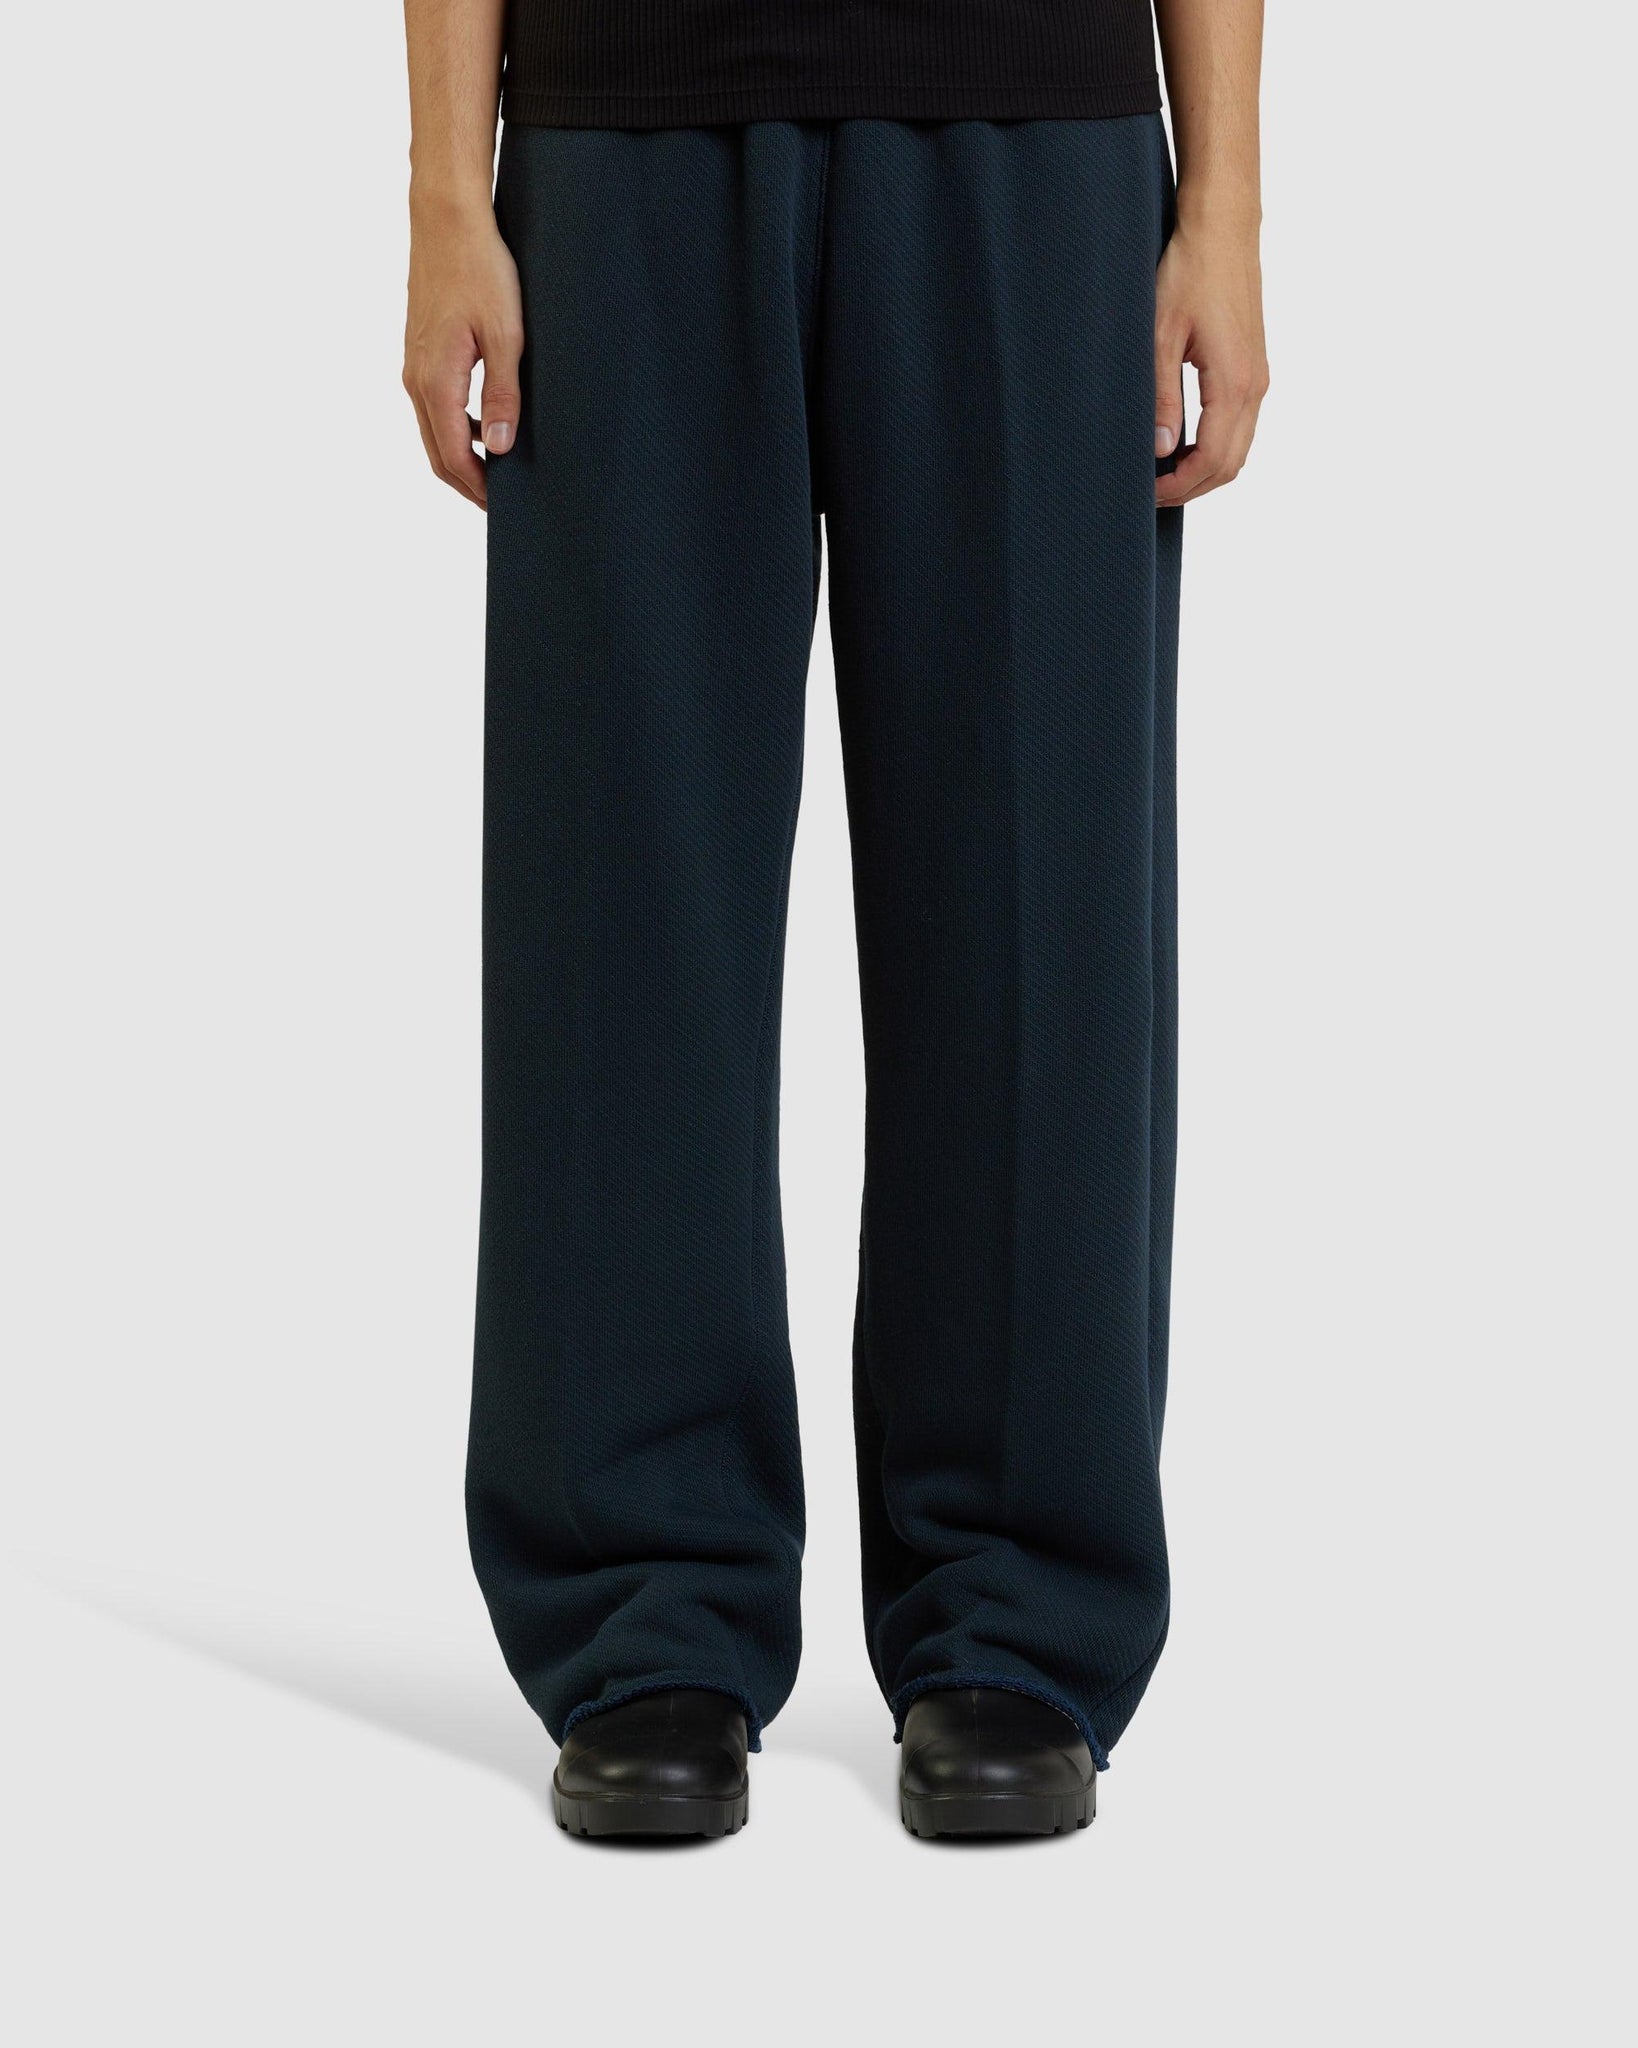 Embroidered Jersey Pants - {{ collection.title }} - Chinatown Country Club 